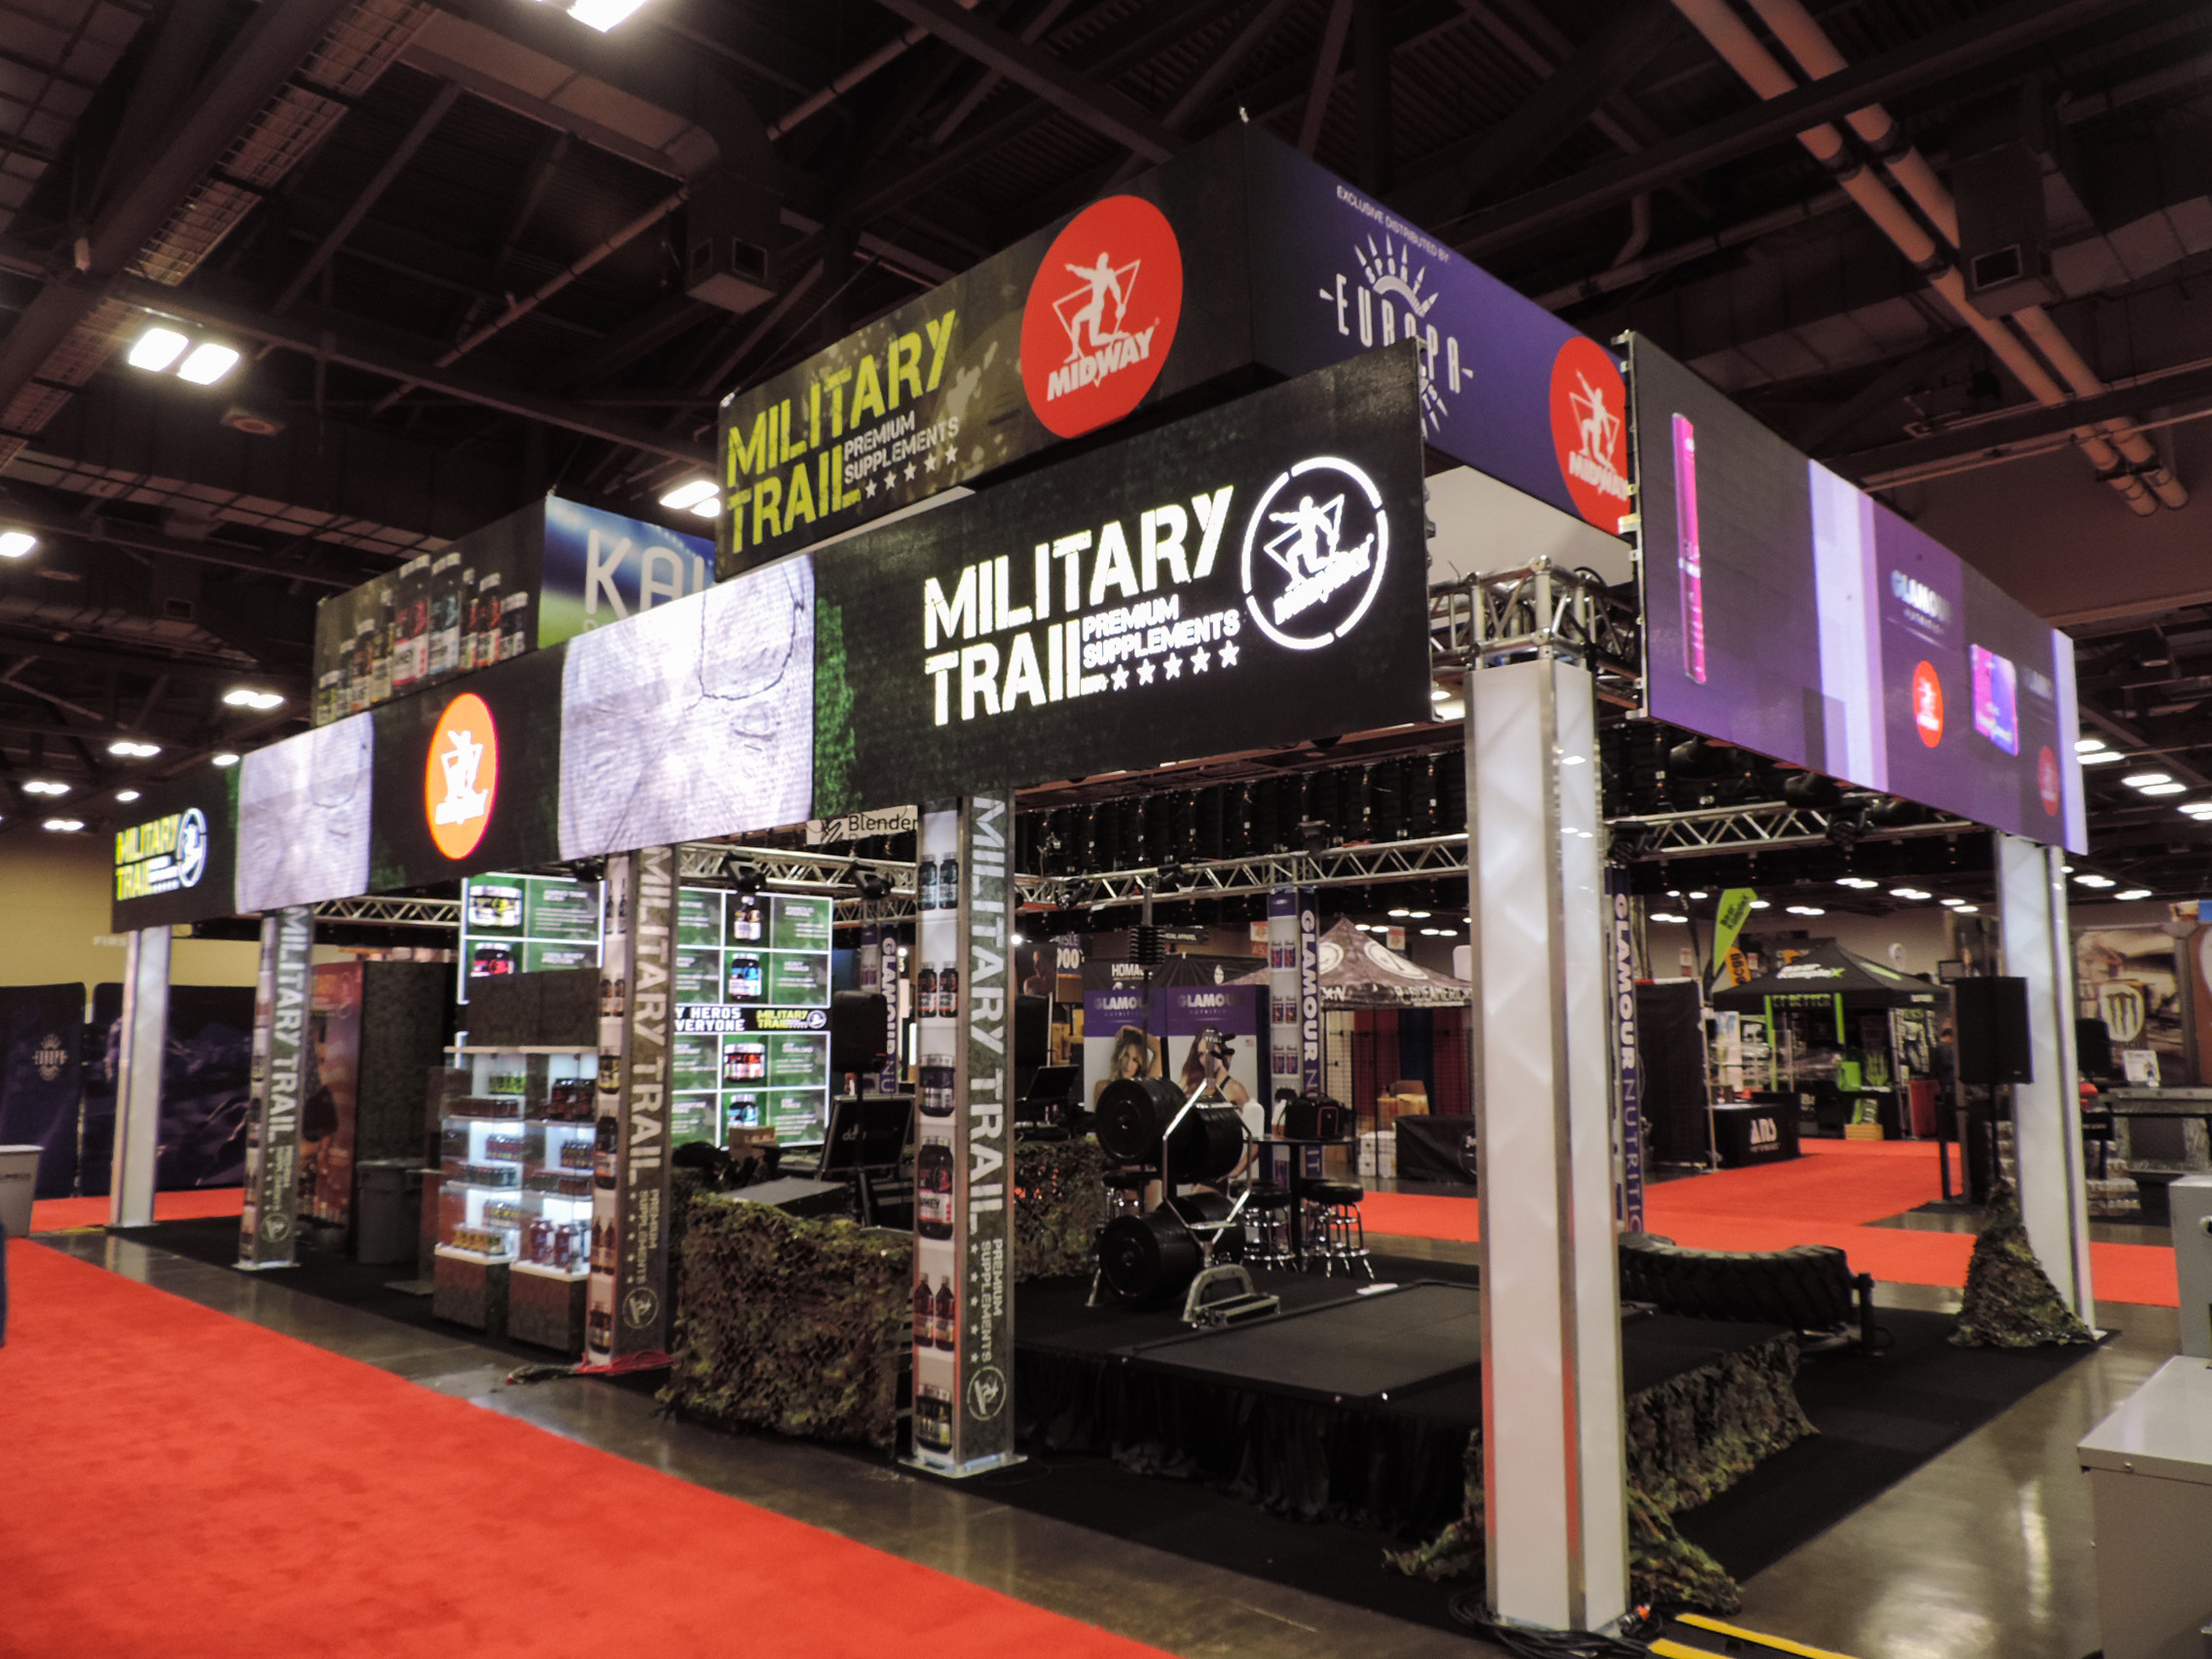 Military Trail Booth.